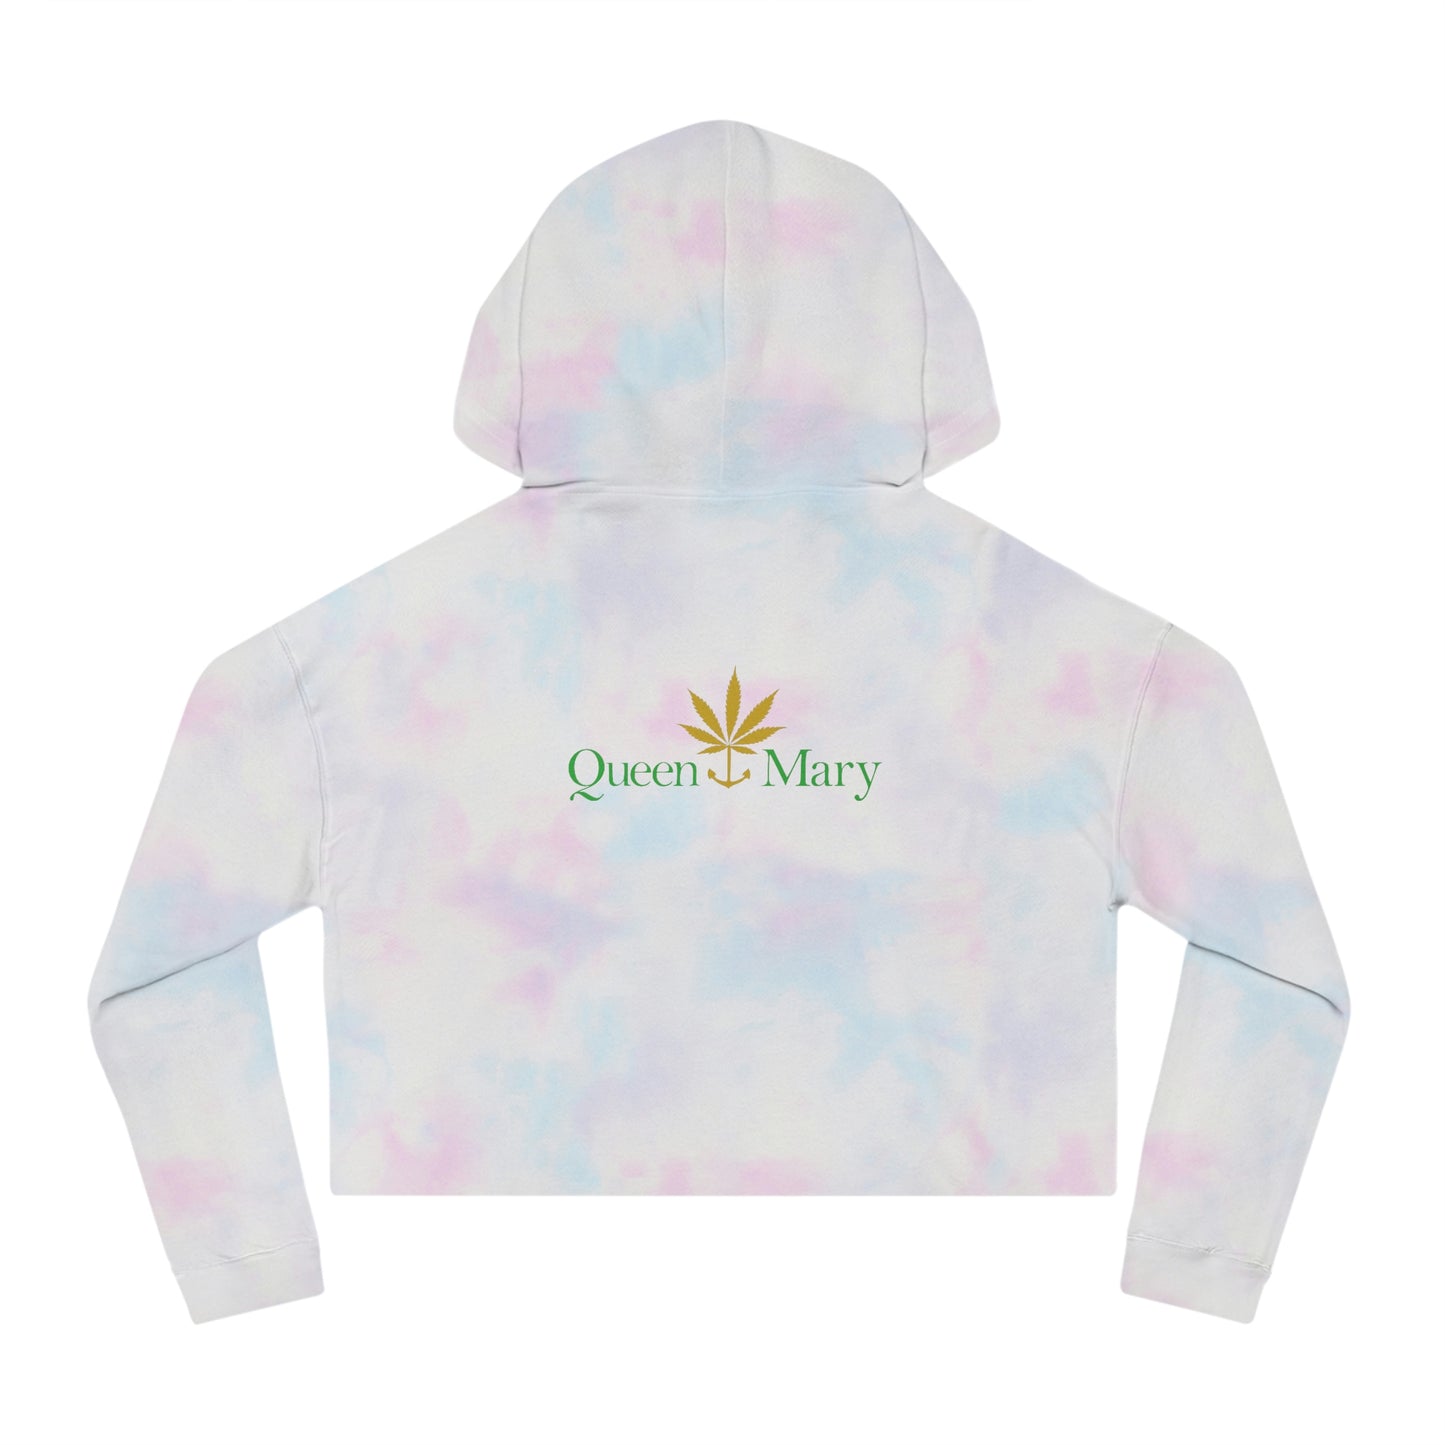 Women’s Cropped Hooded Sweatshirt by Queen Mary